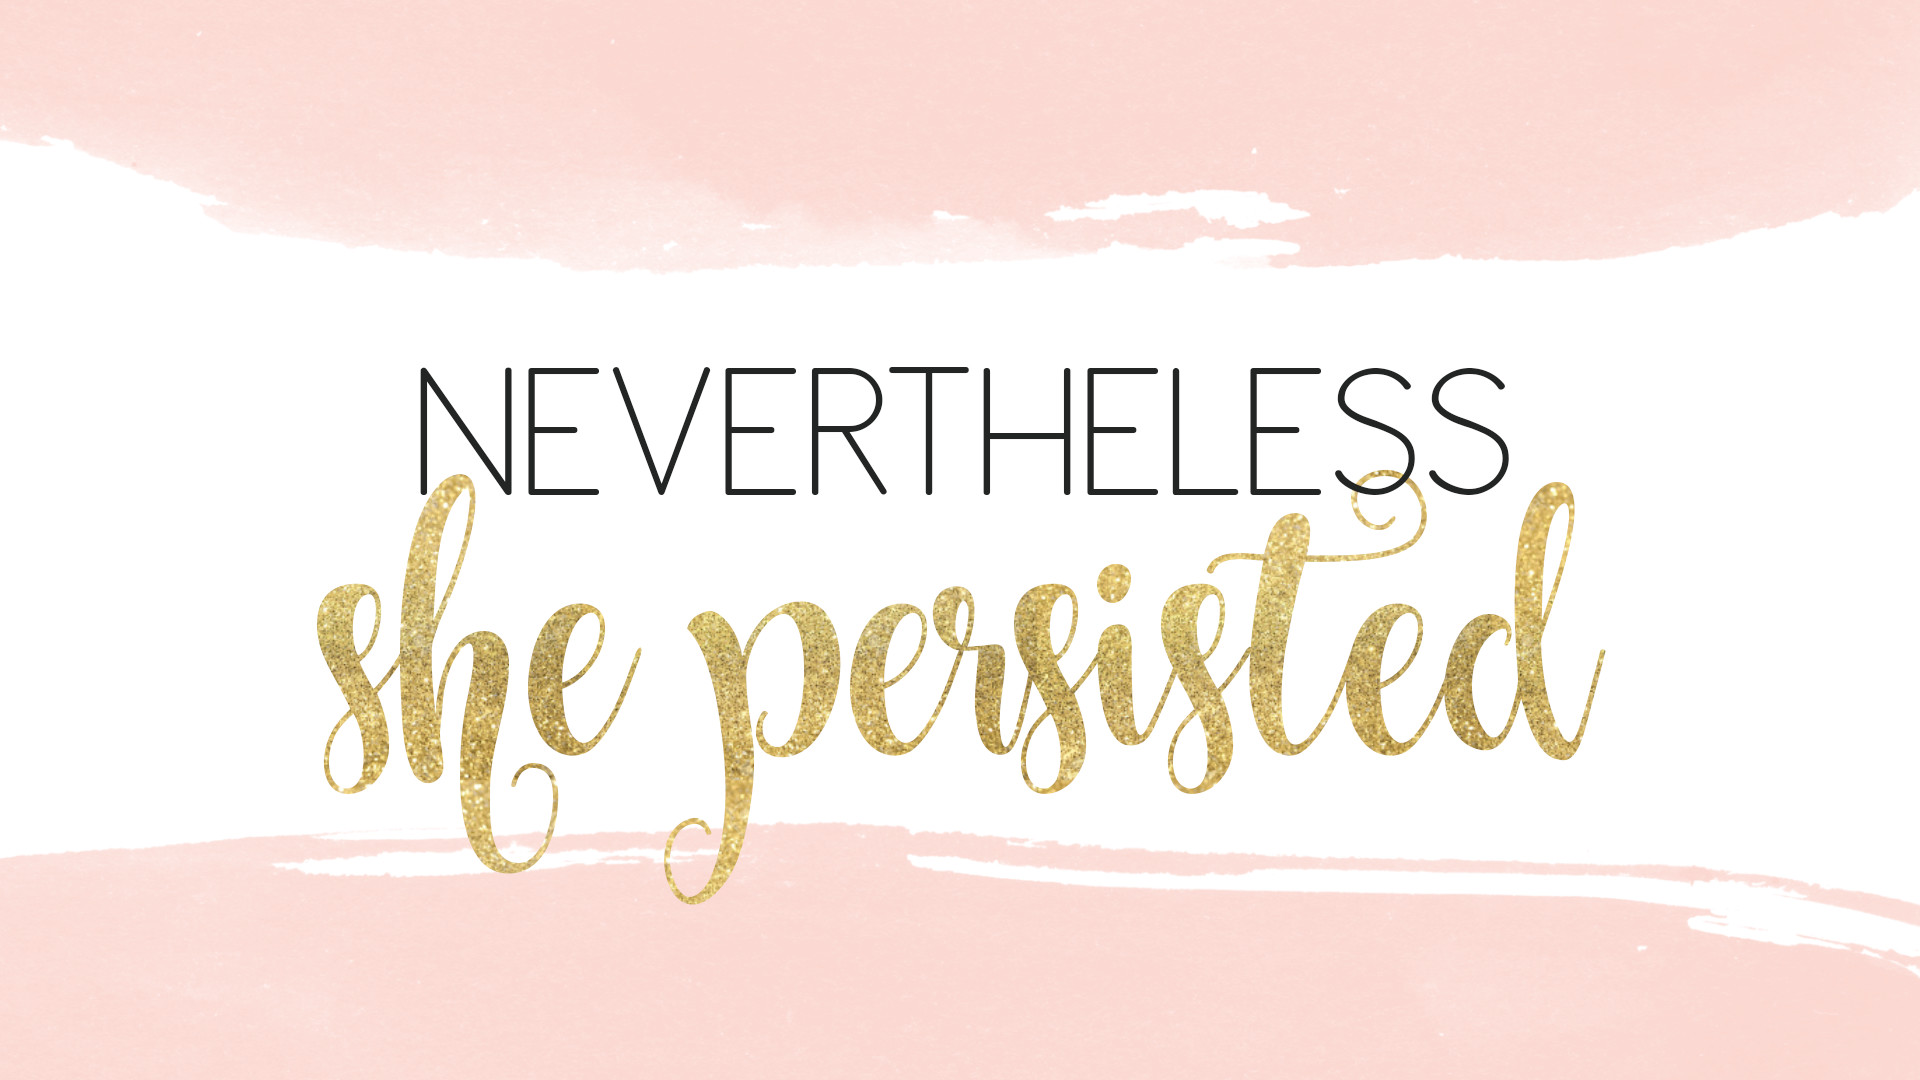 1920x1080 Nevertheless She Persisted | motivational quote for desktop background  wallpaper. find more to download free - girl power inspiration on the blog.